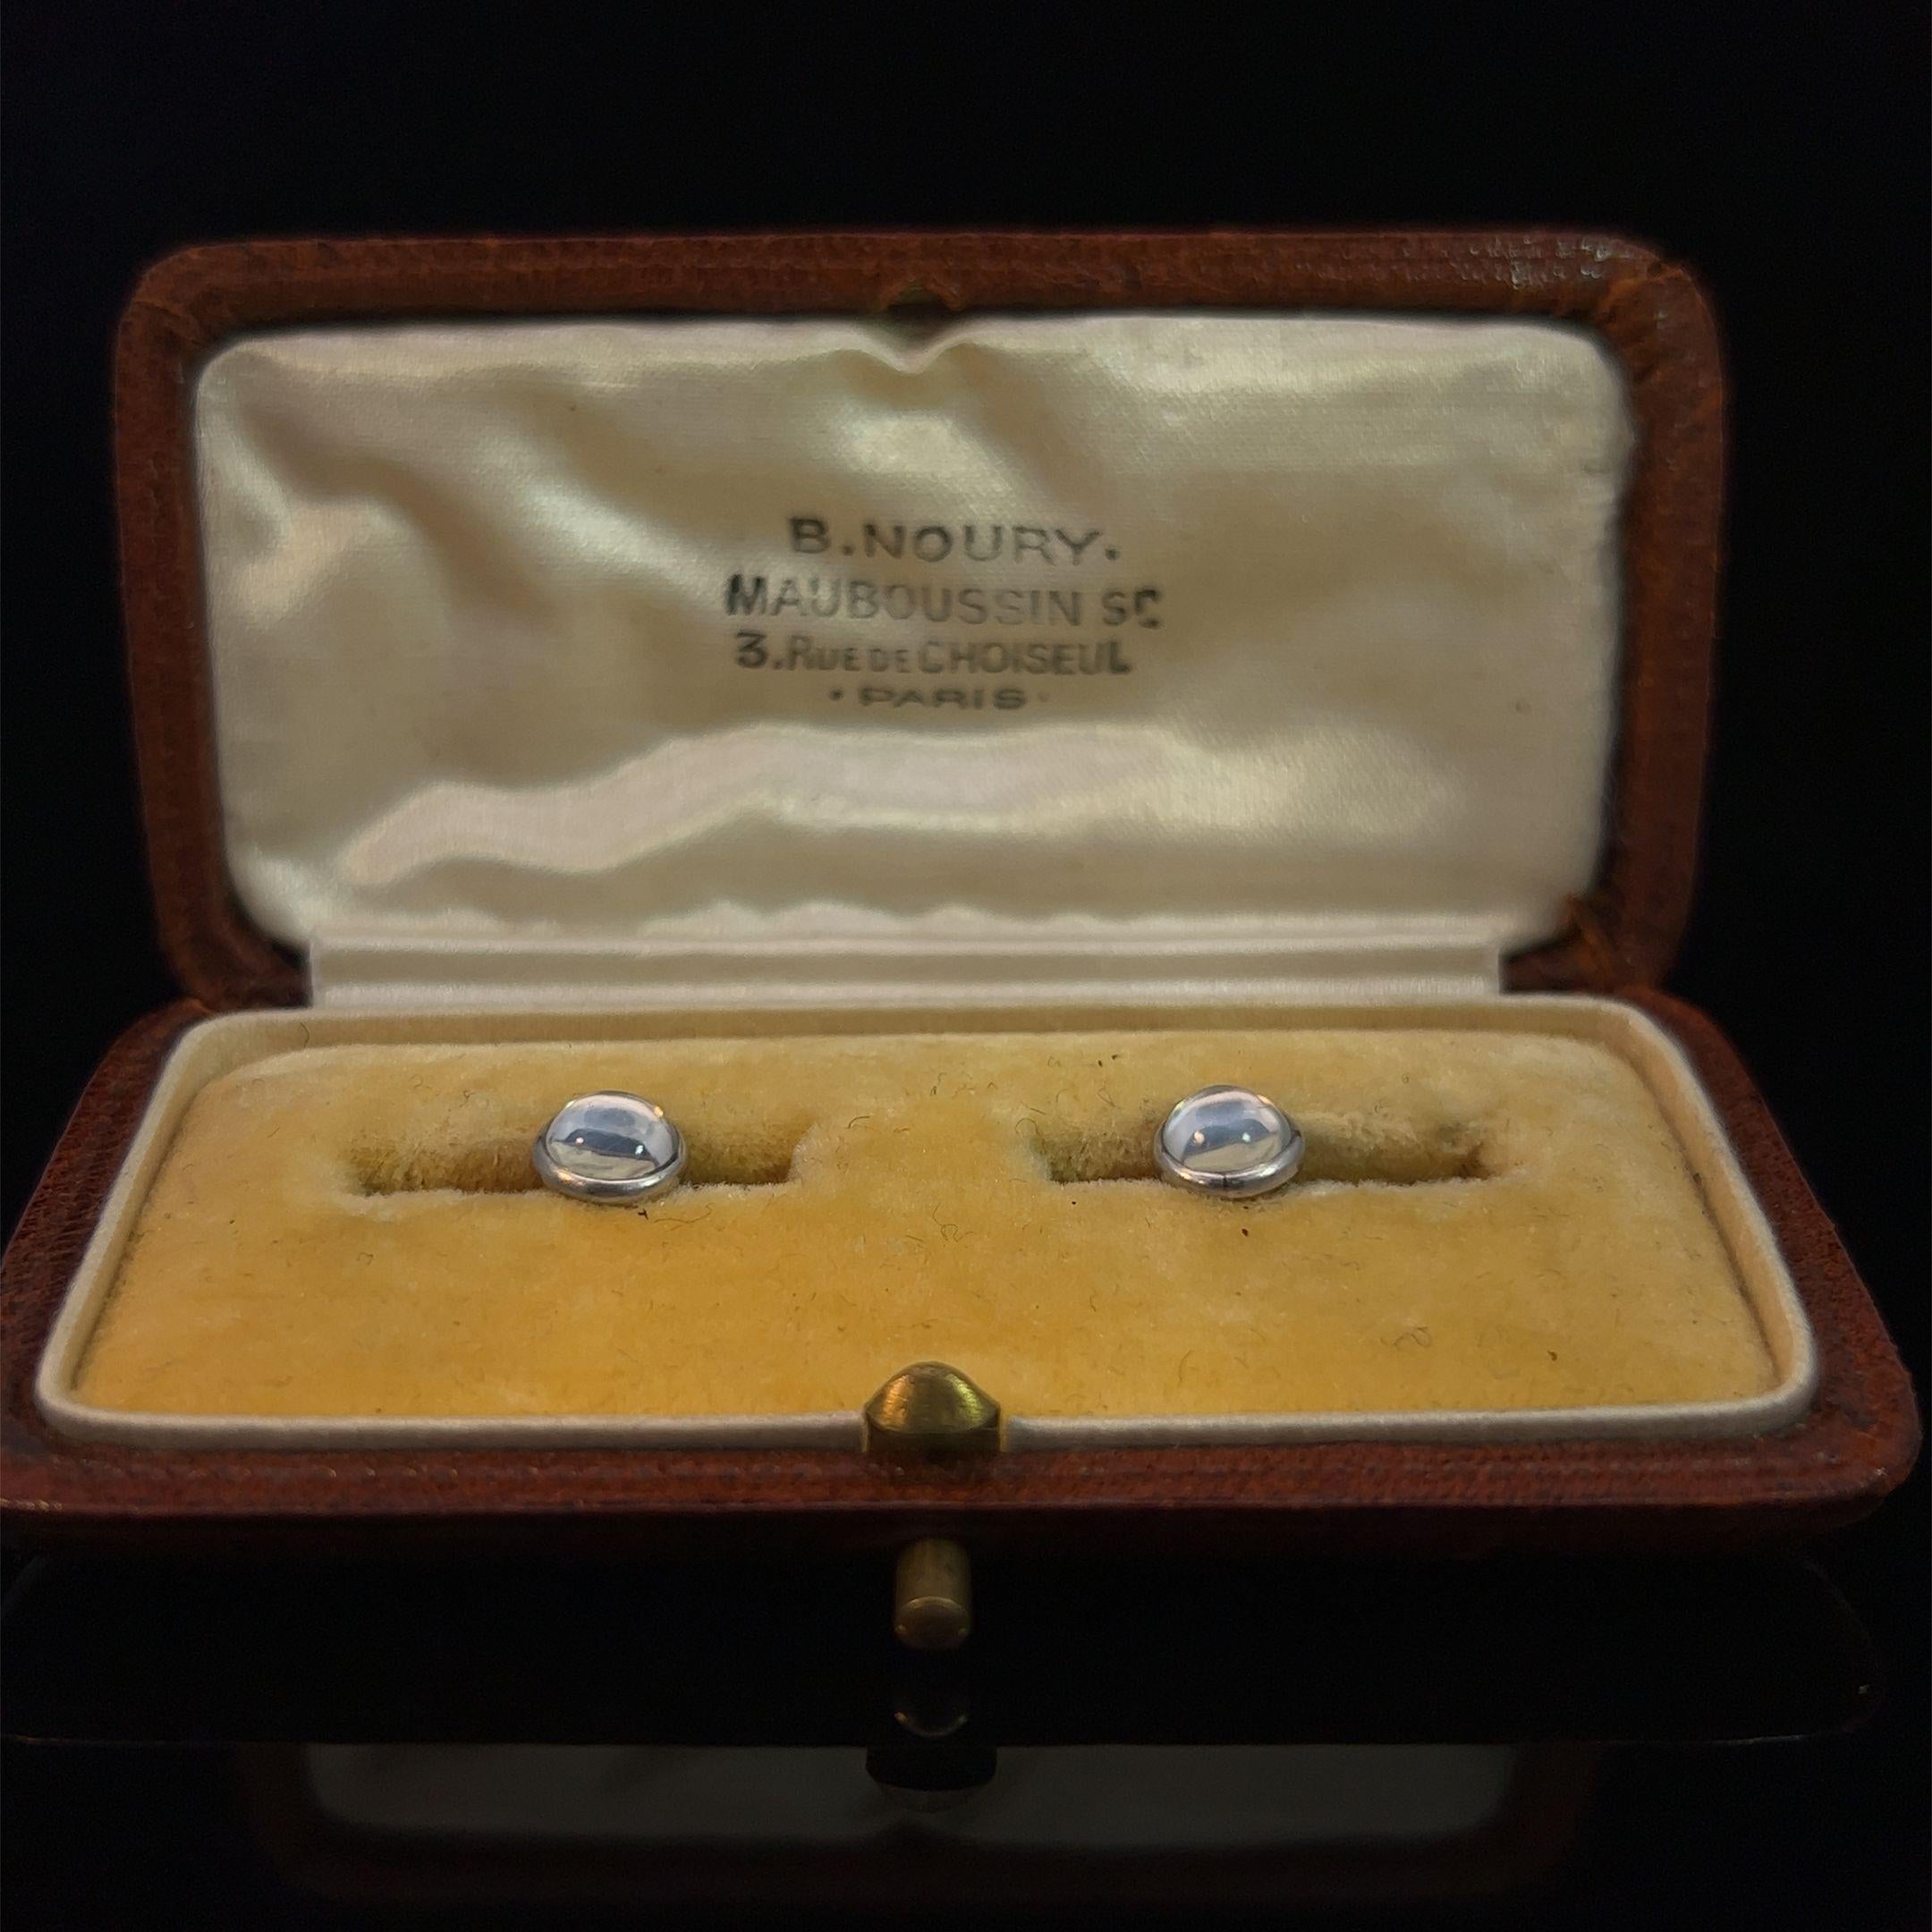 One pair of shirt studs each set with a moonstone and with a yellow gold sprung fitting. Housed in original Mauboussin case.

Mauboussin is a renowned French jewellery and luxury goods company with a rich history dating back to 1827. While